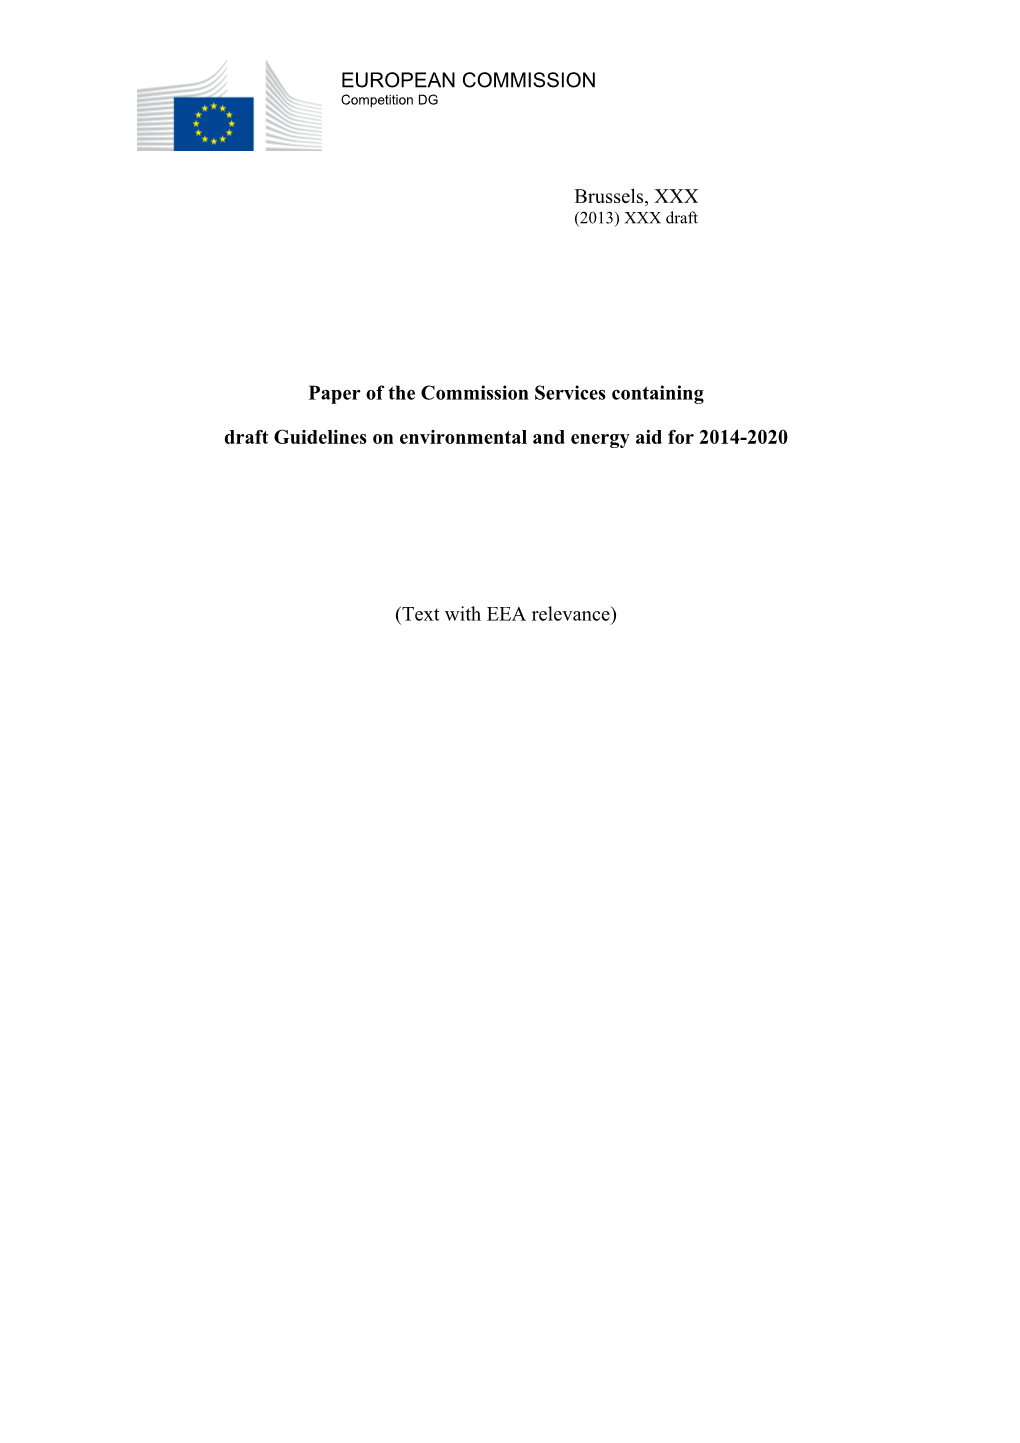 Paper of the Commission Services Containing